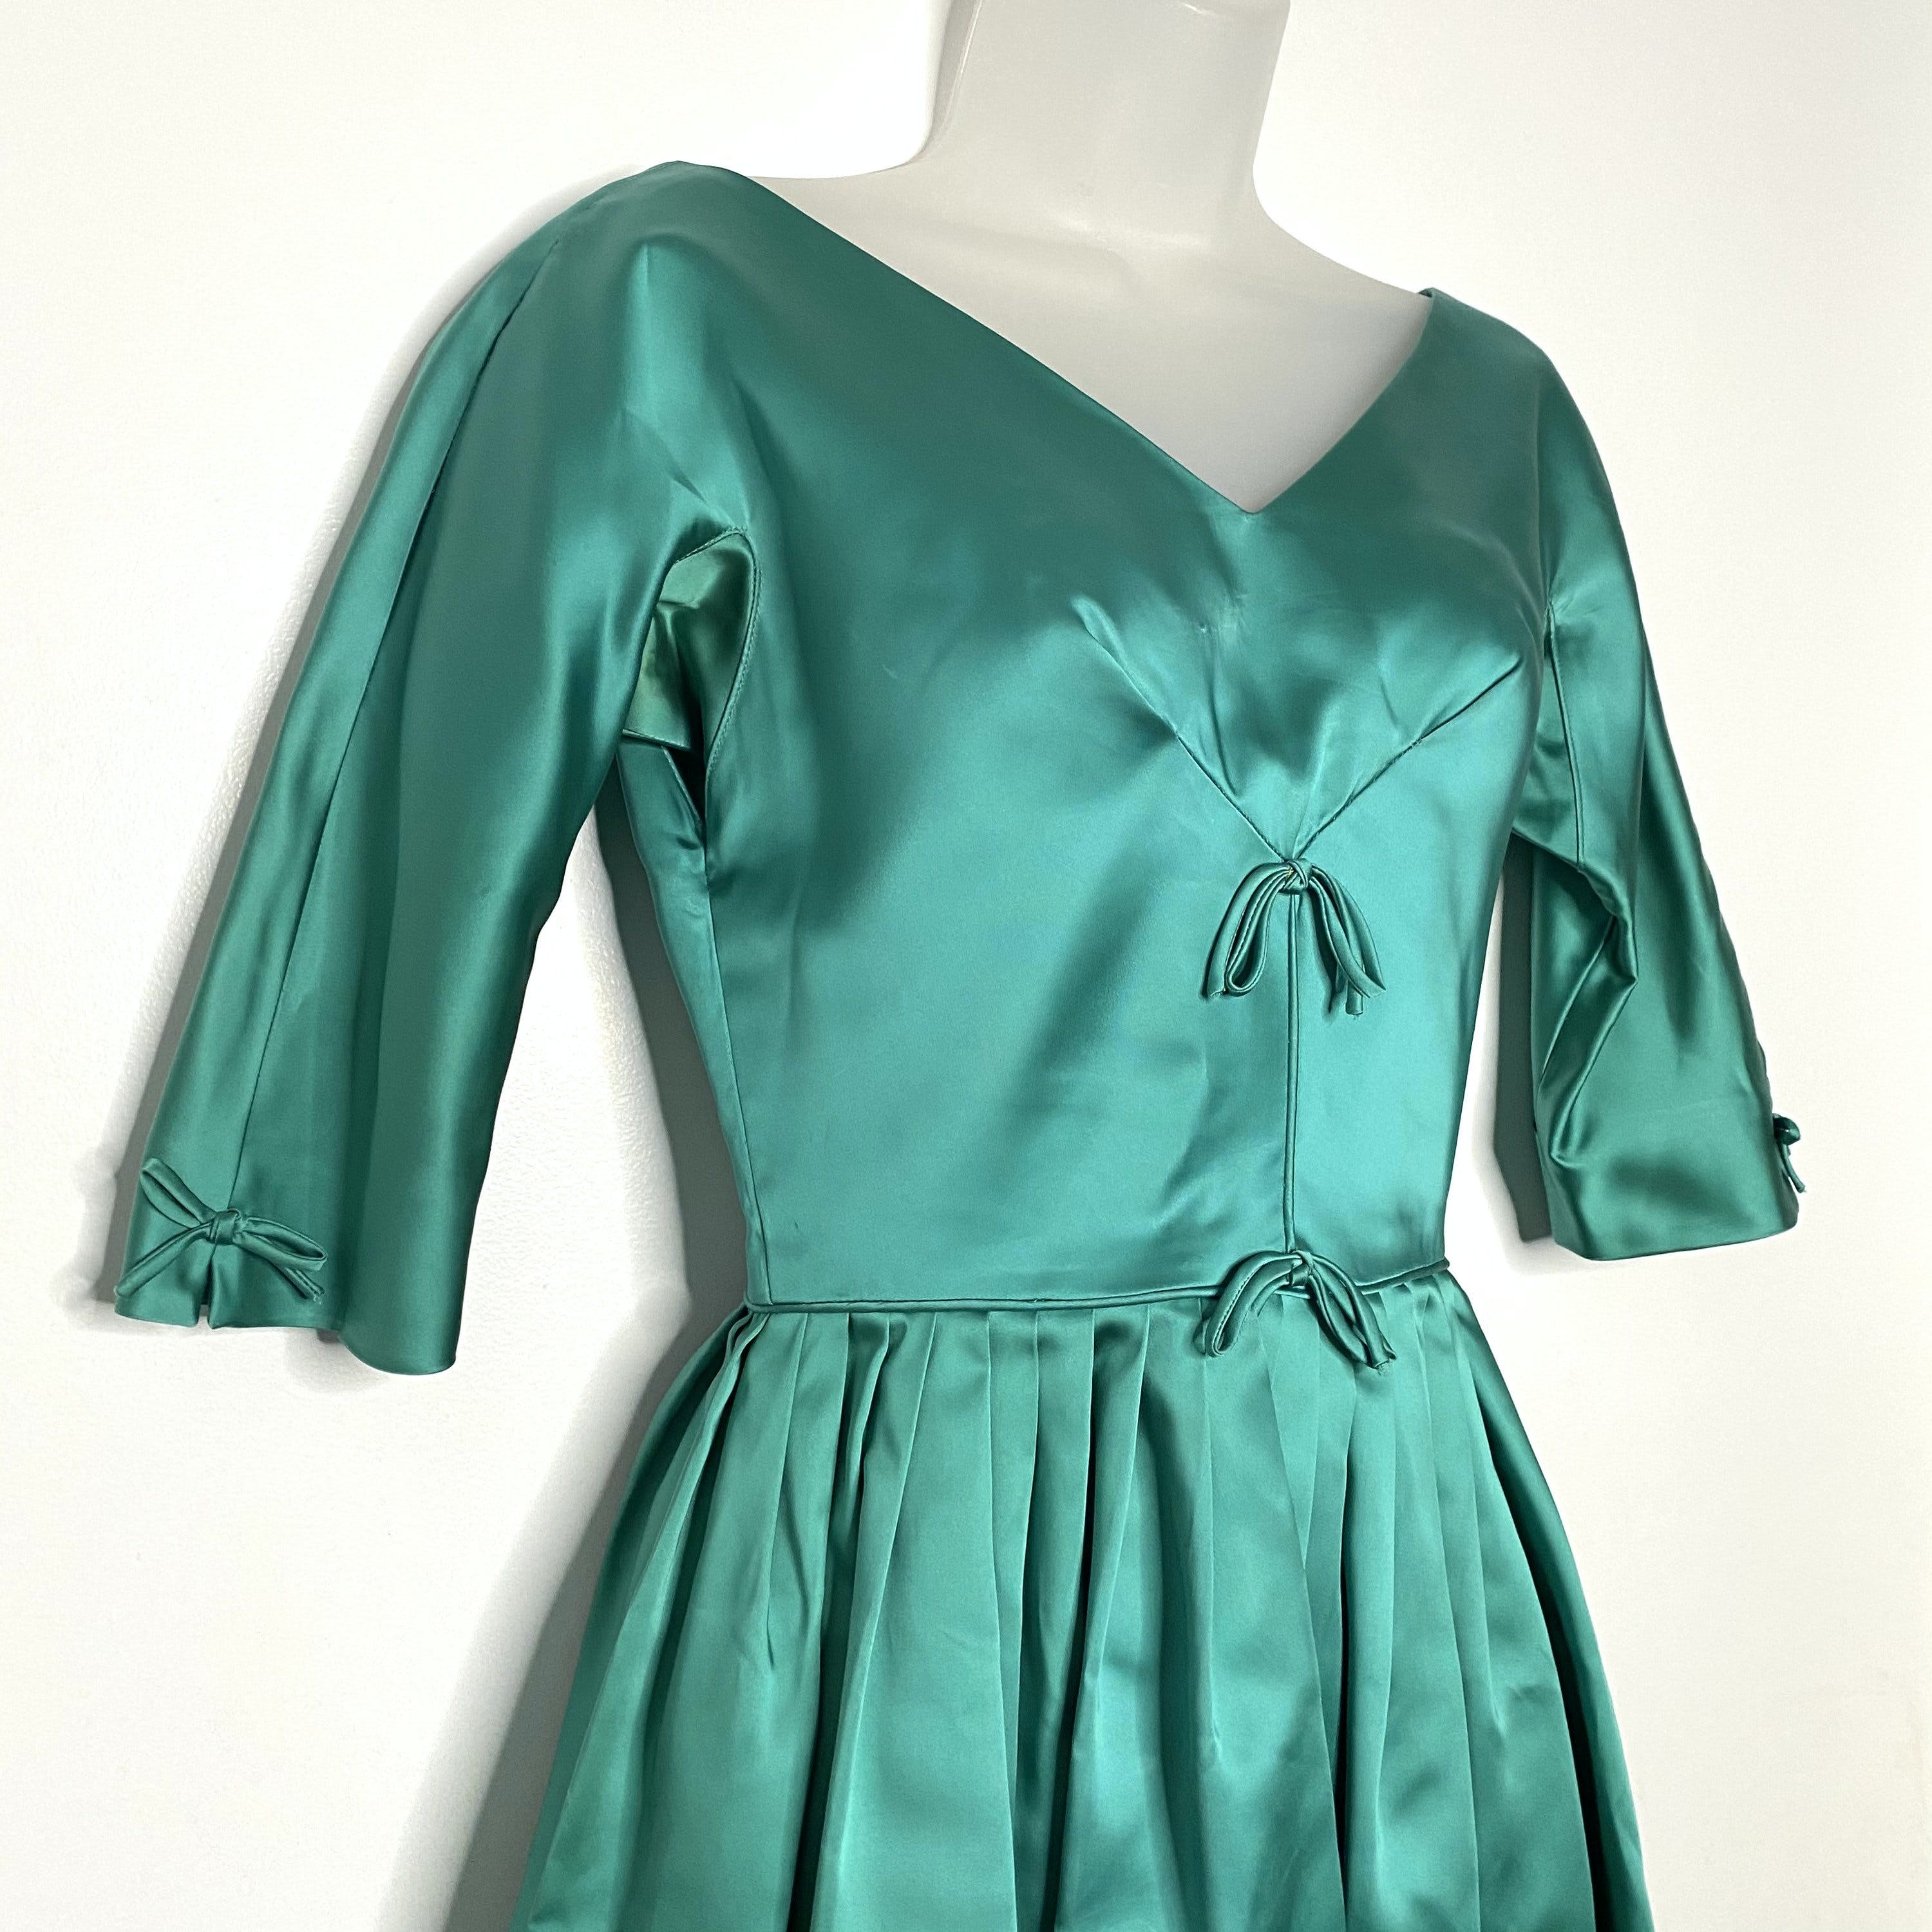 Vintage 50's/60's Green Satin Cocktail Dress by Emma Domb | Shop THRILLING